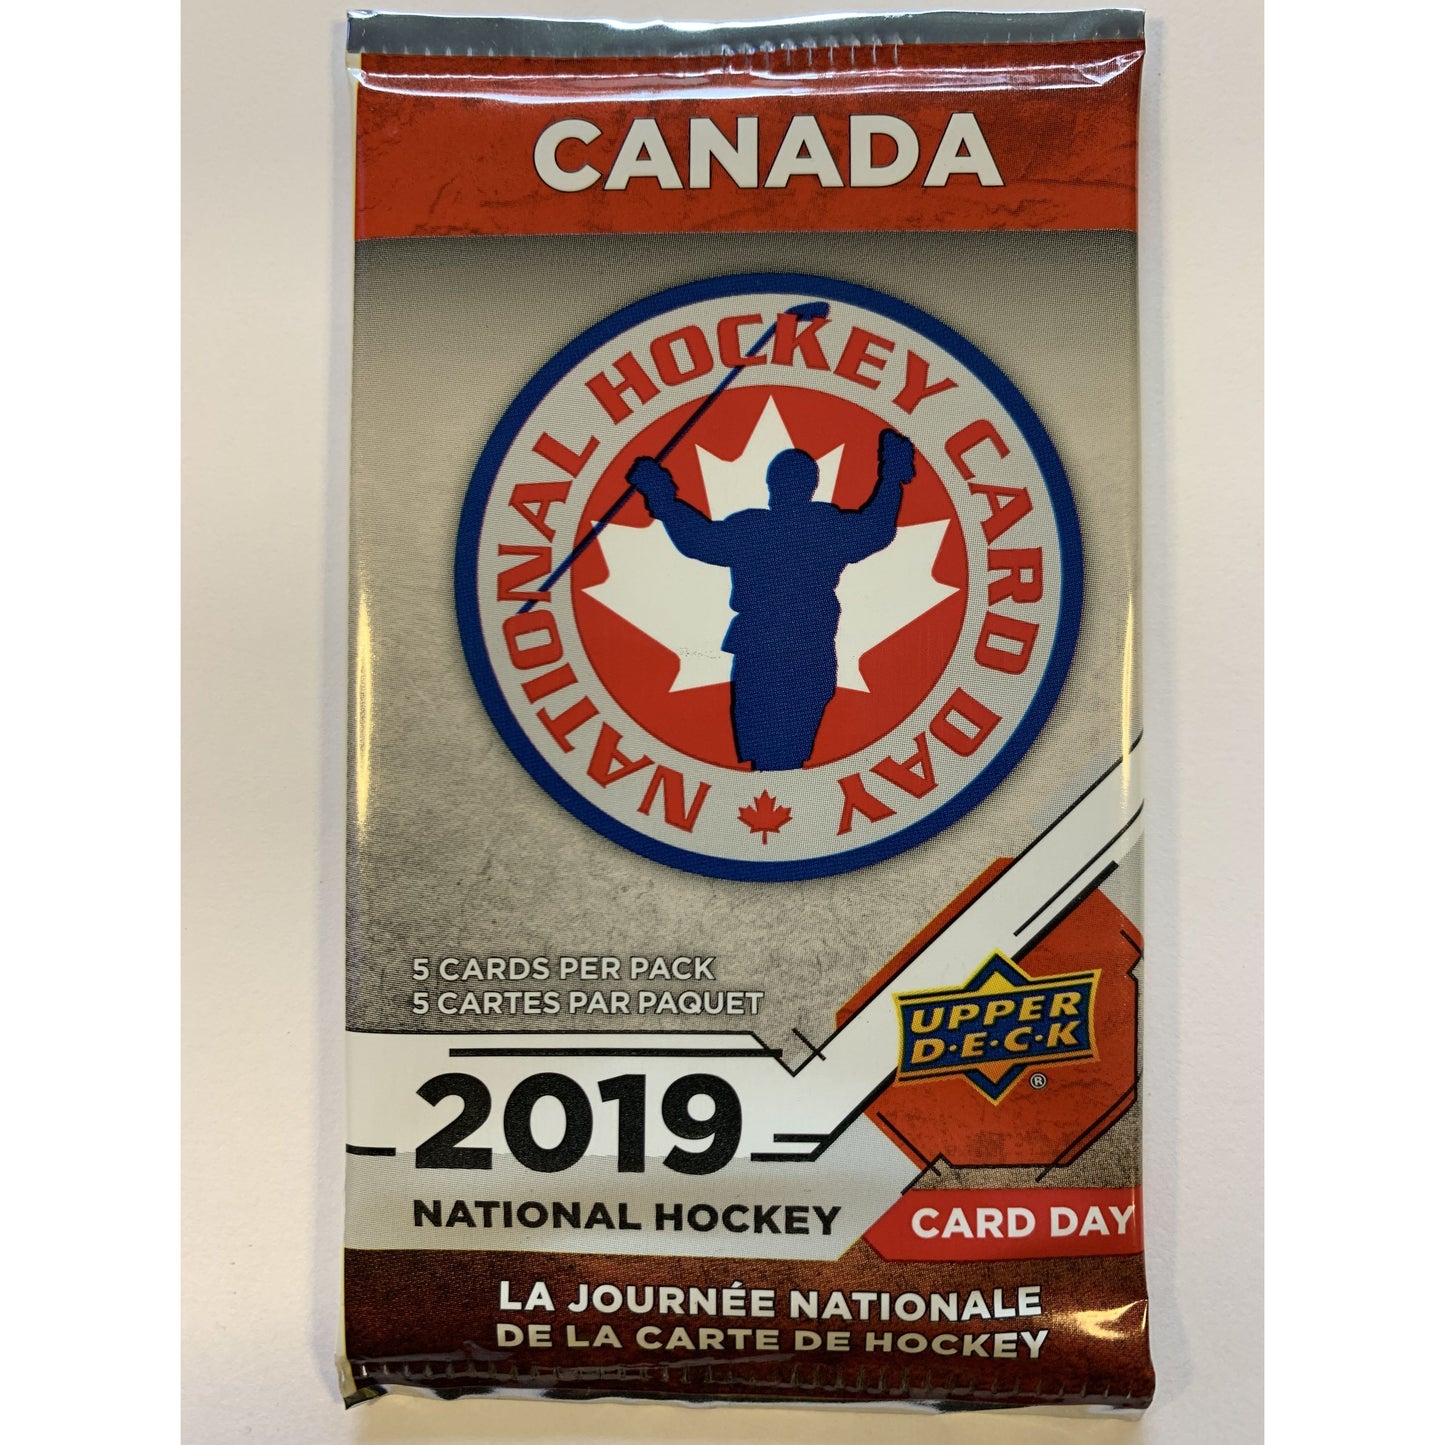  2019 Upper Deck National Hockey Card Day in Canada Pack  Local Legends Cards & Collectibles